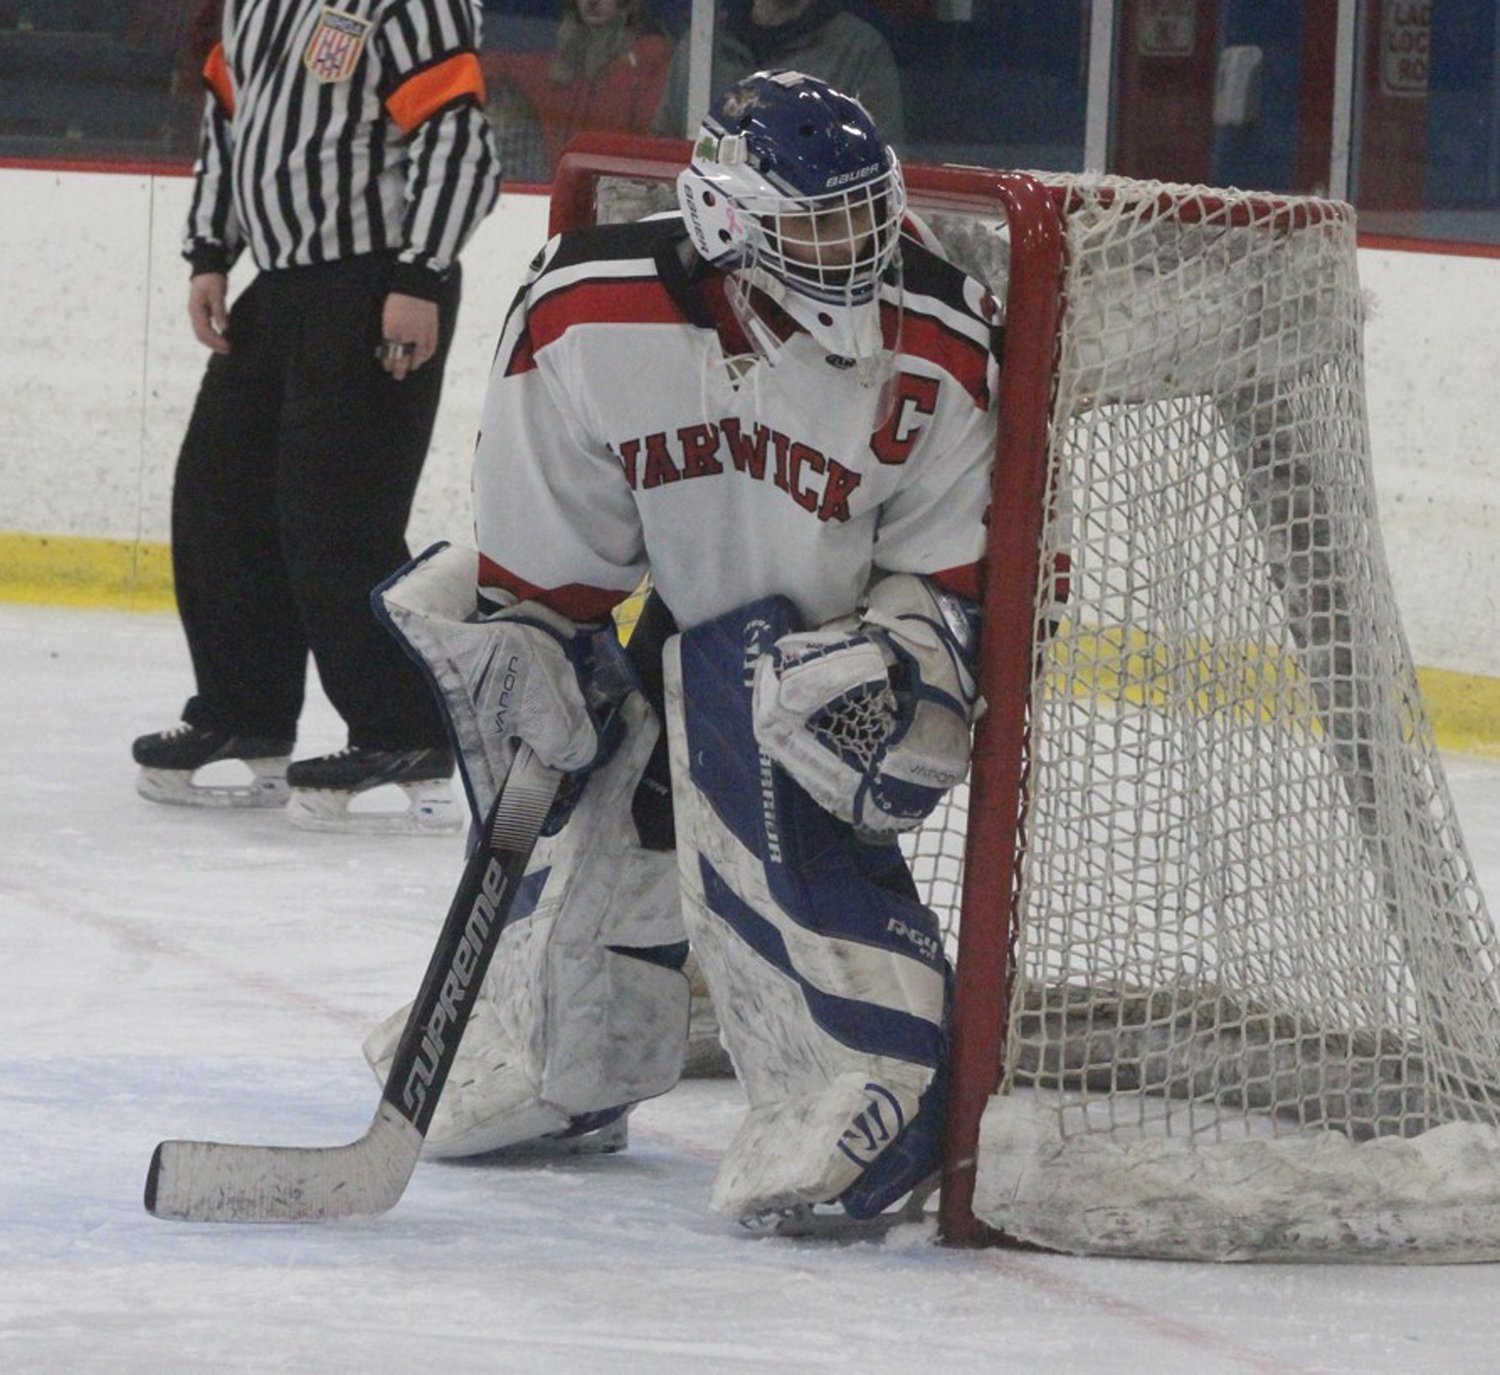 IN NET: Warwick girls hockey goalie Mary Centracchio tracks the puck behind her last week in the first round of the playoffs. (Photos by Alex Sponseller)